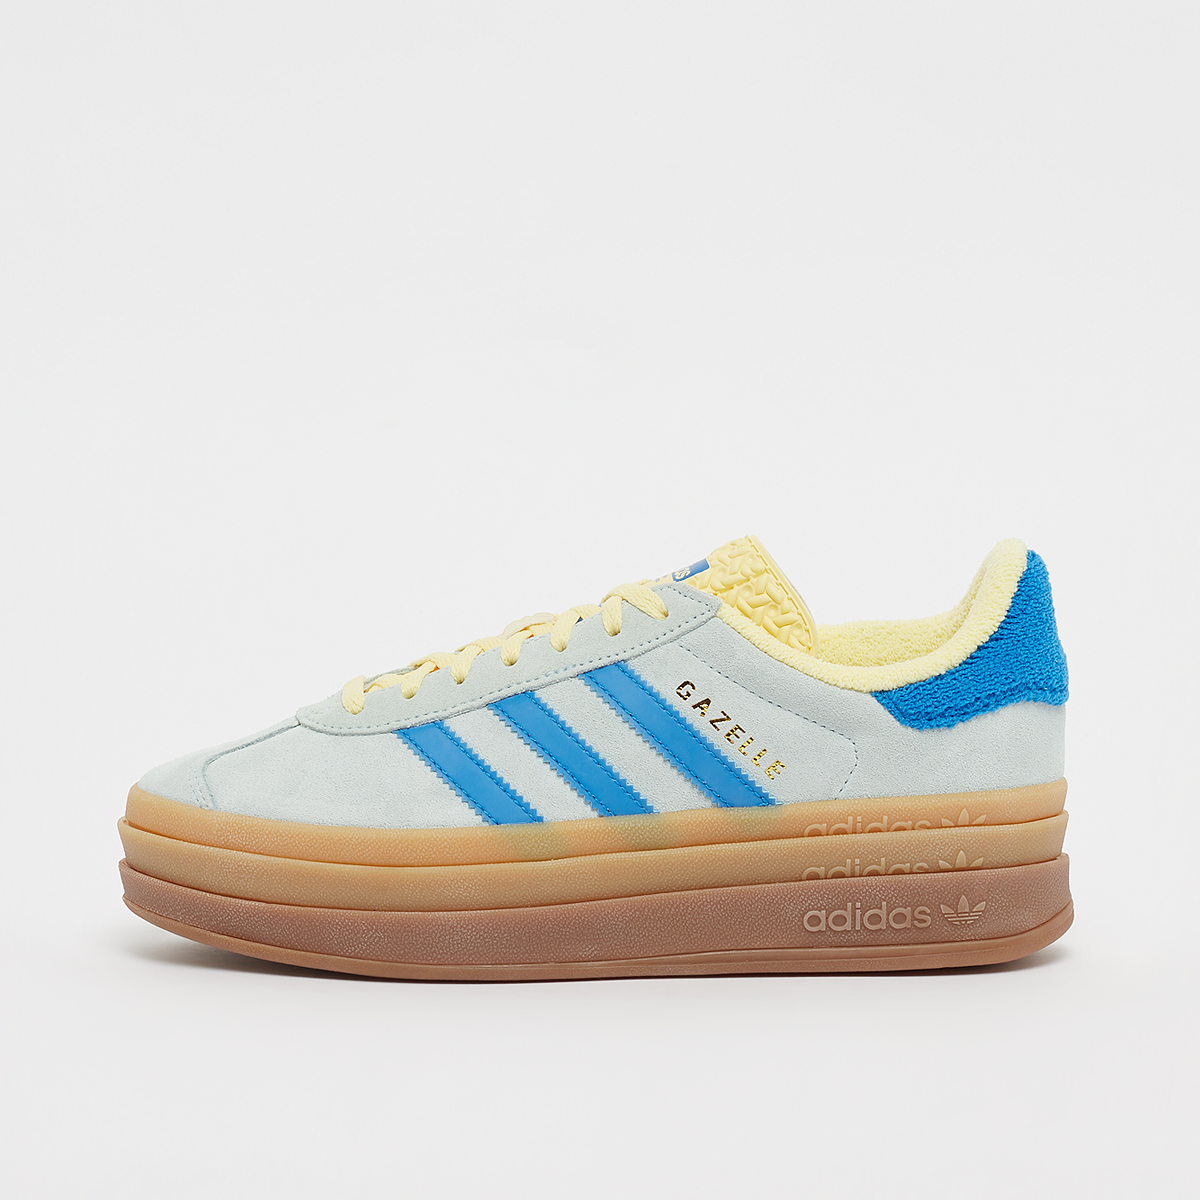 Sneaker Gazelle Bold W, adidas Originals, Footwear, almost blue/bright blue/almost yellow, taille: 40